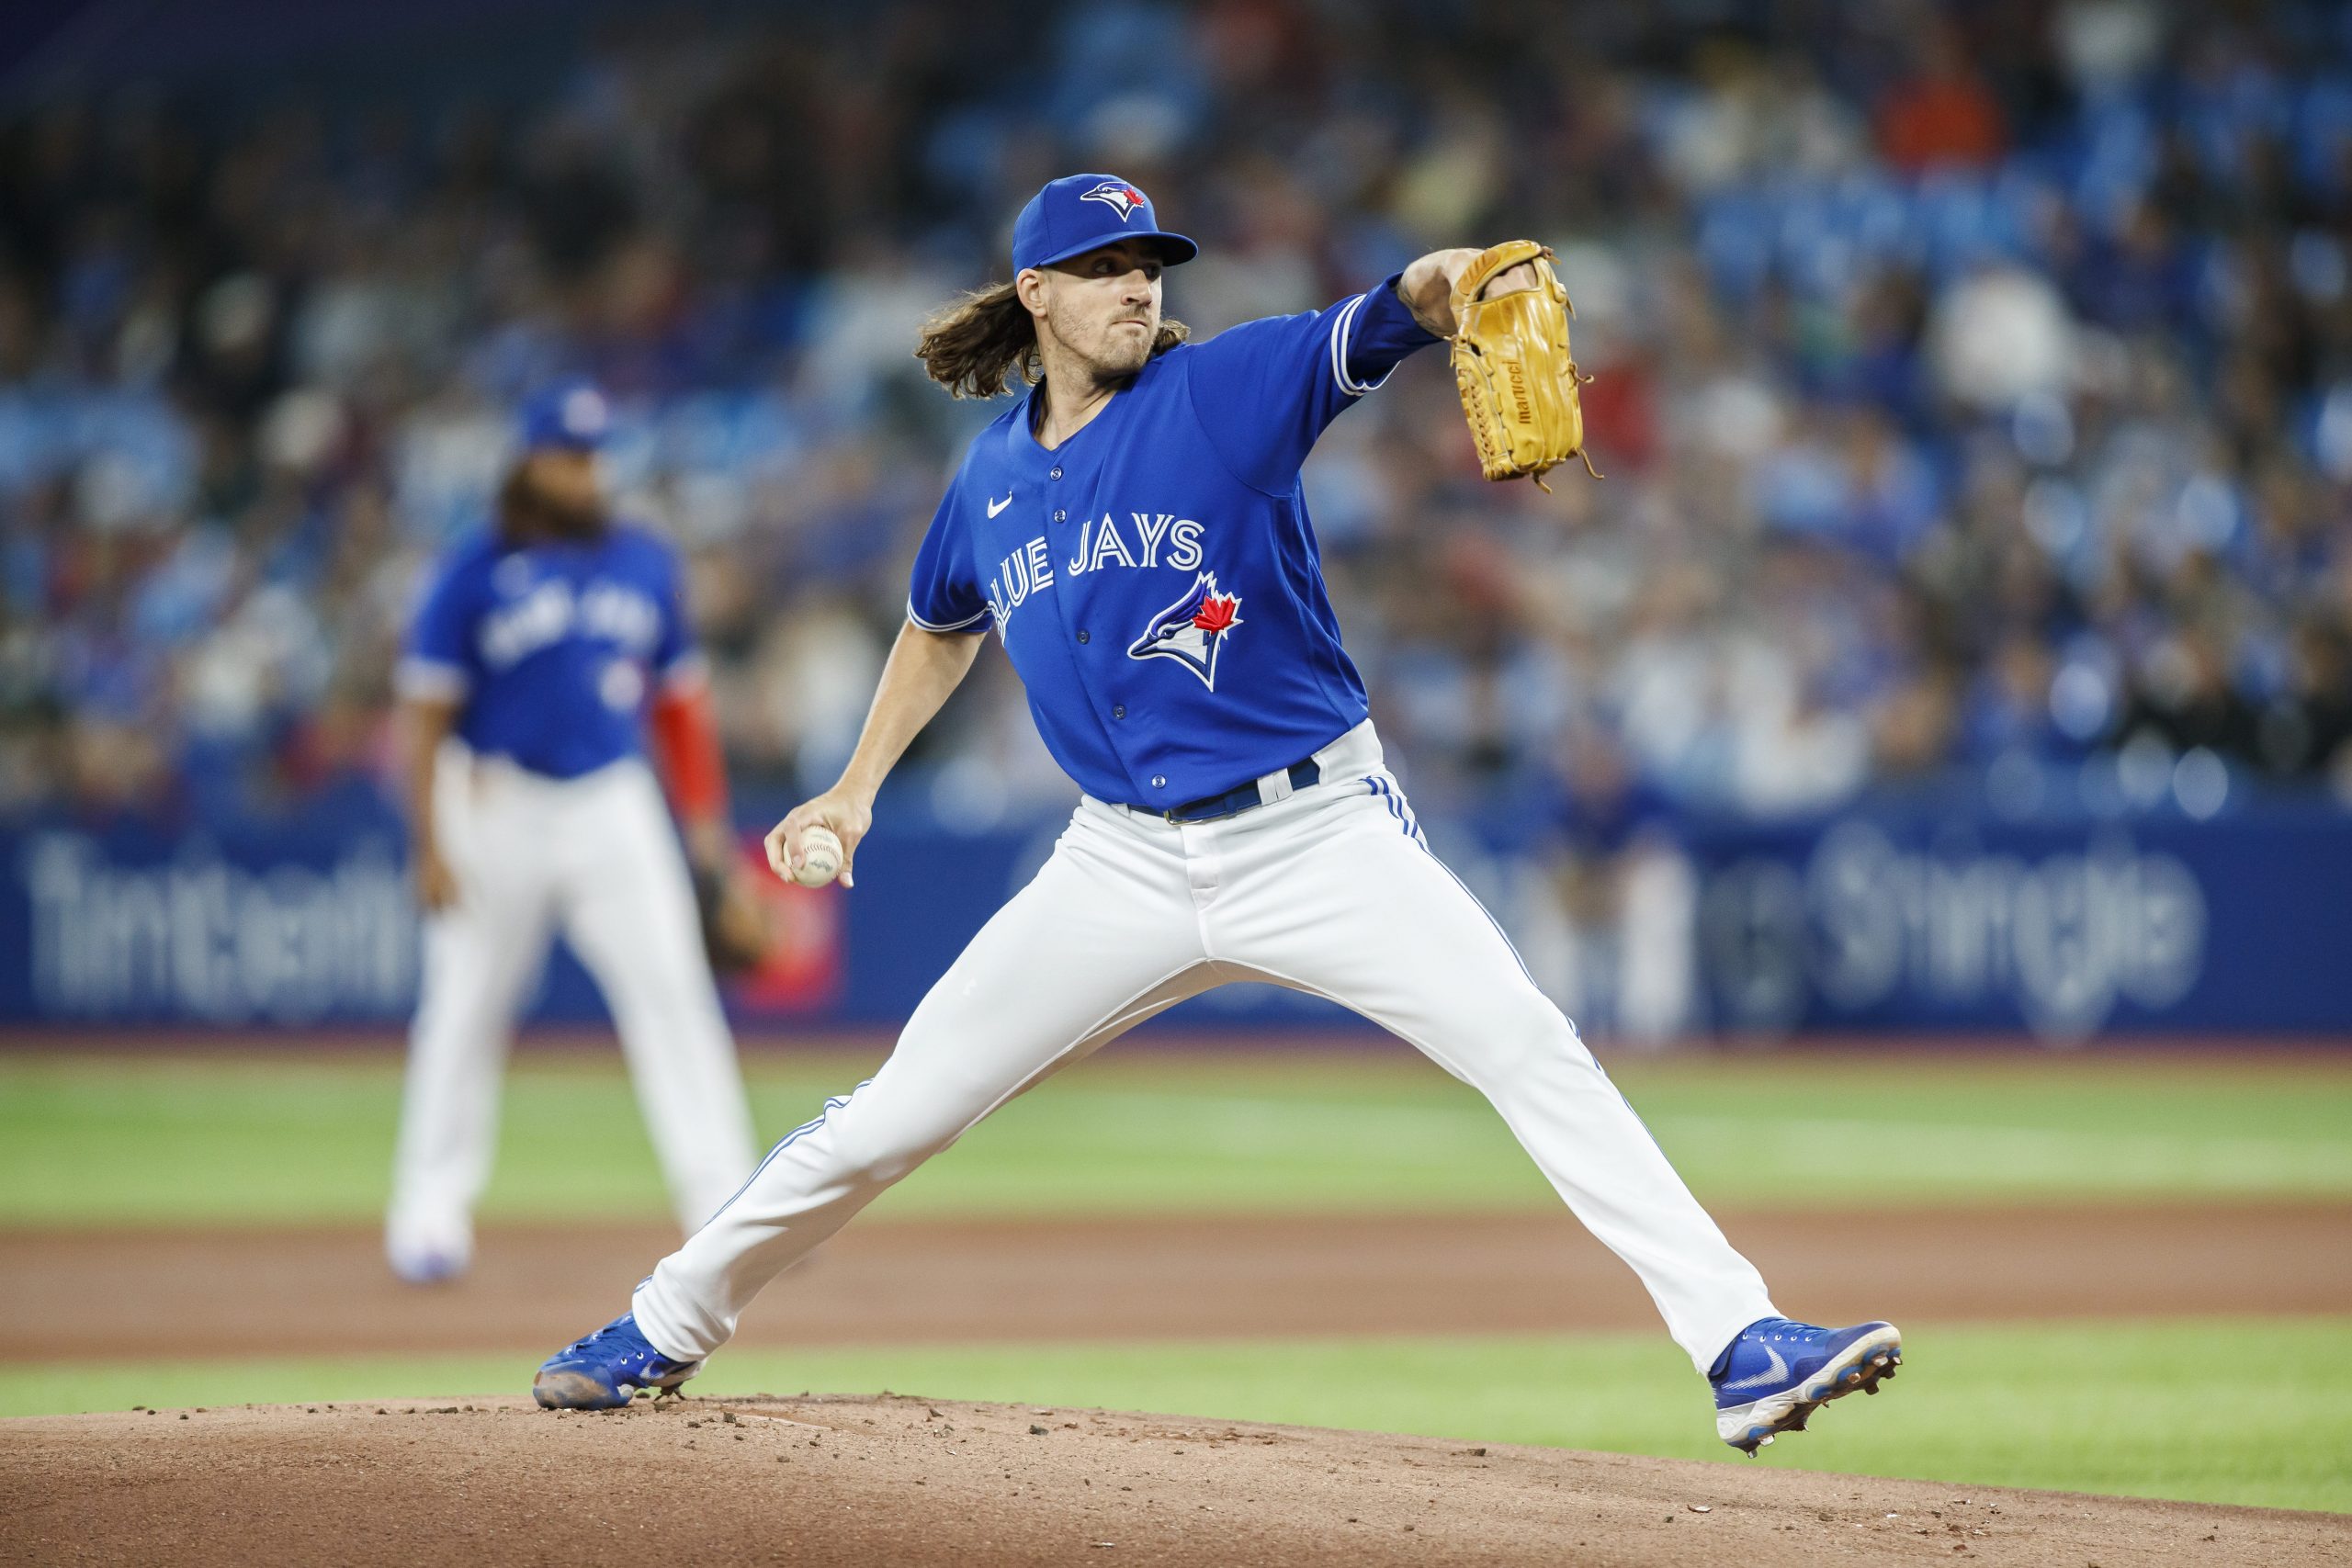 Toronto Blue Jays starting pitcher Robbie Ray throws a pitch to